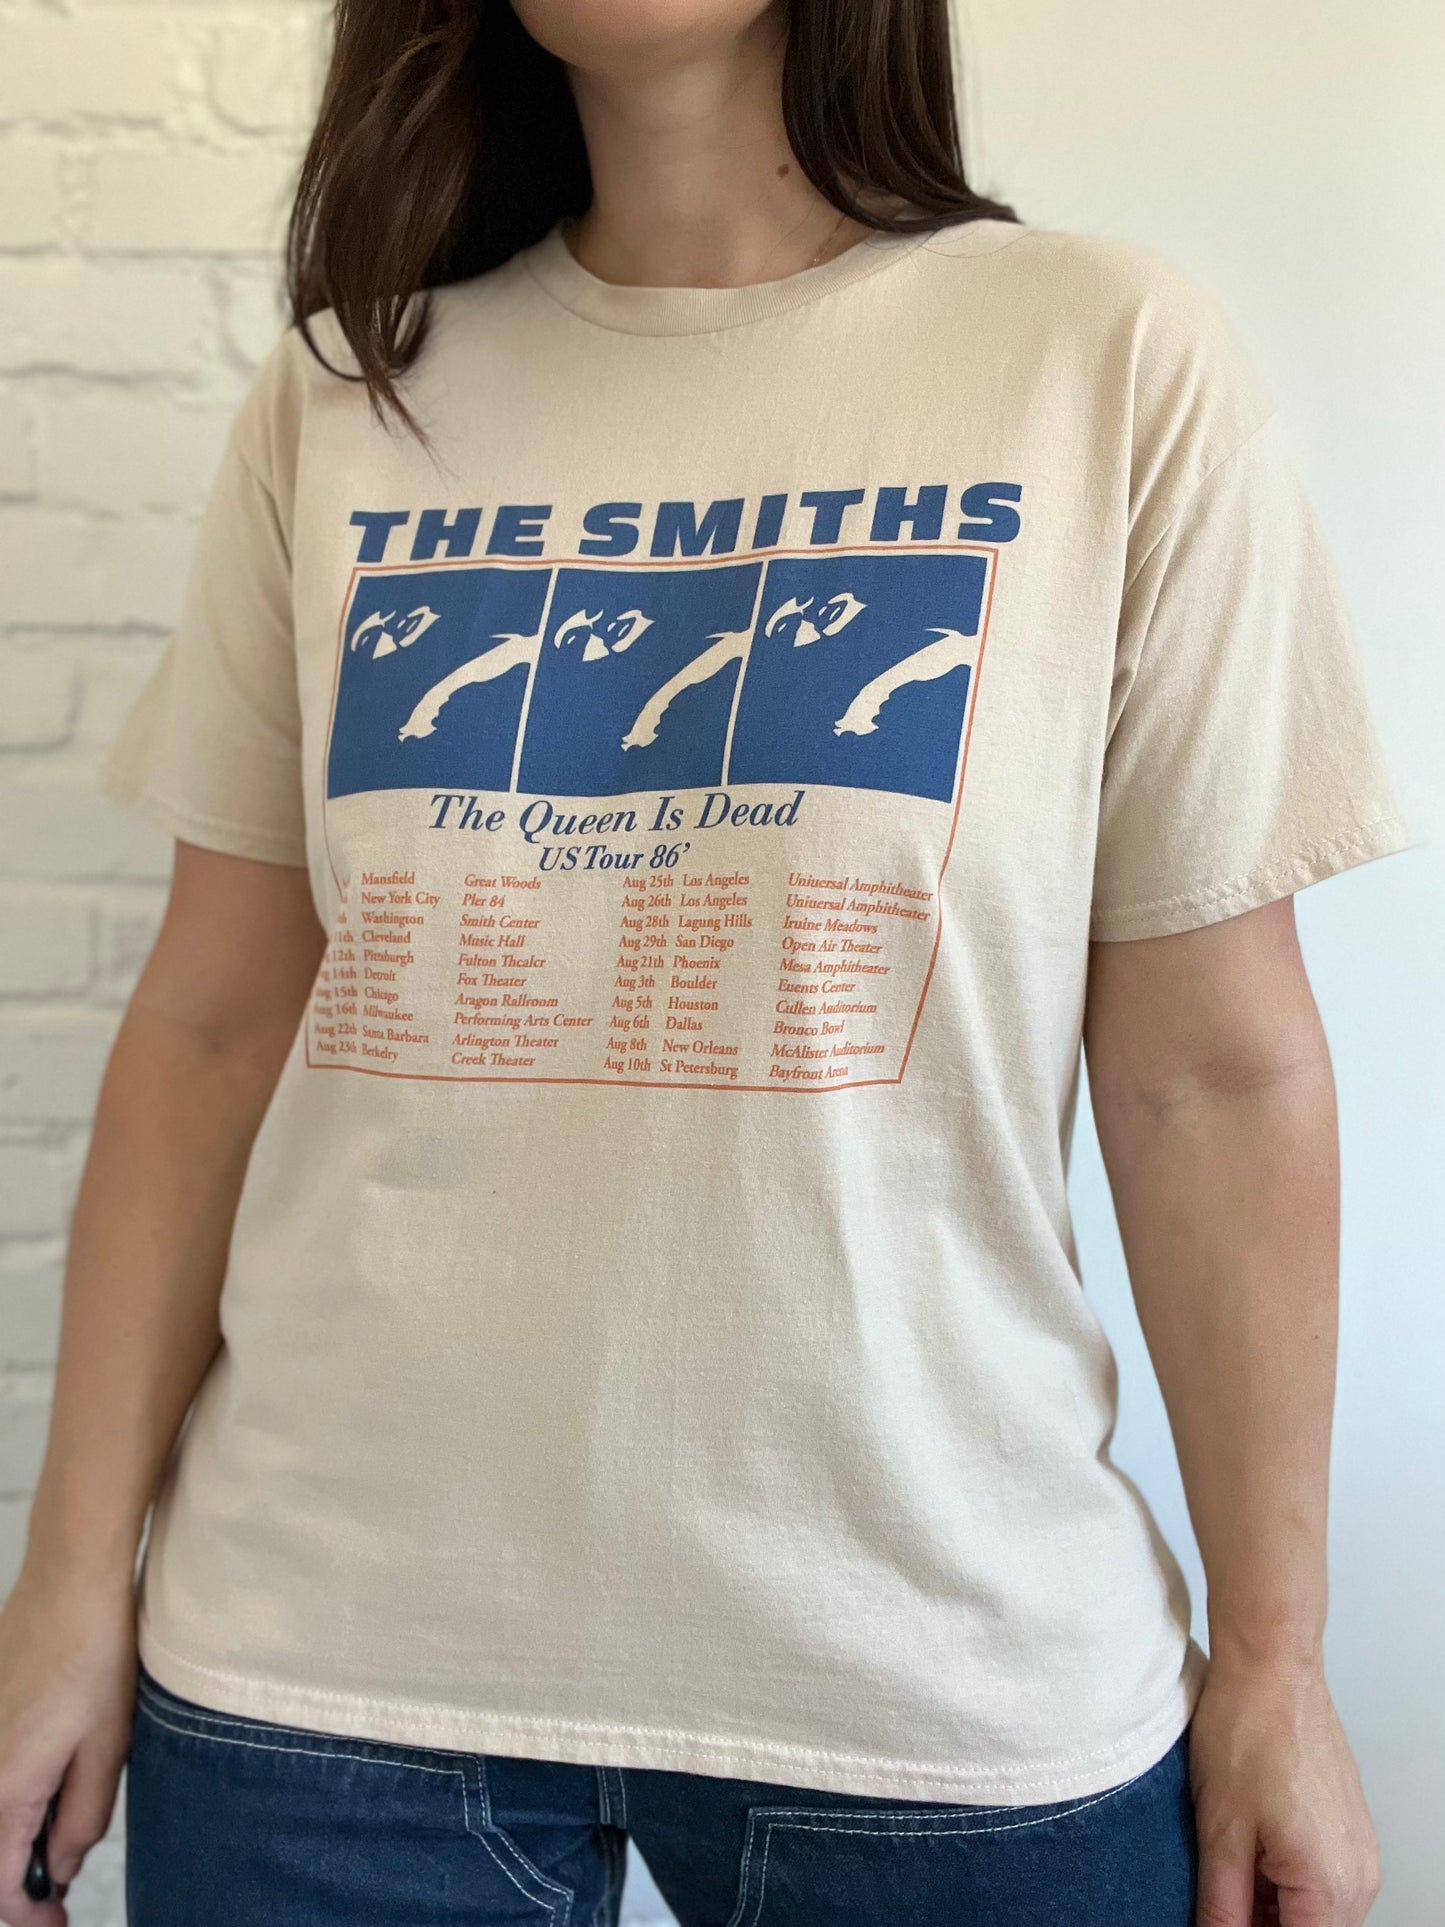 The Smiths The Queen is Dead T-Shirt - Size L